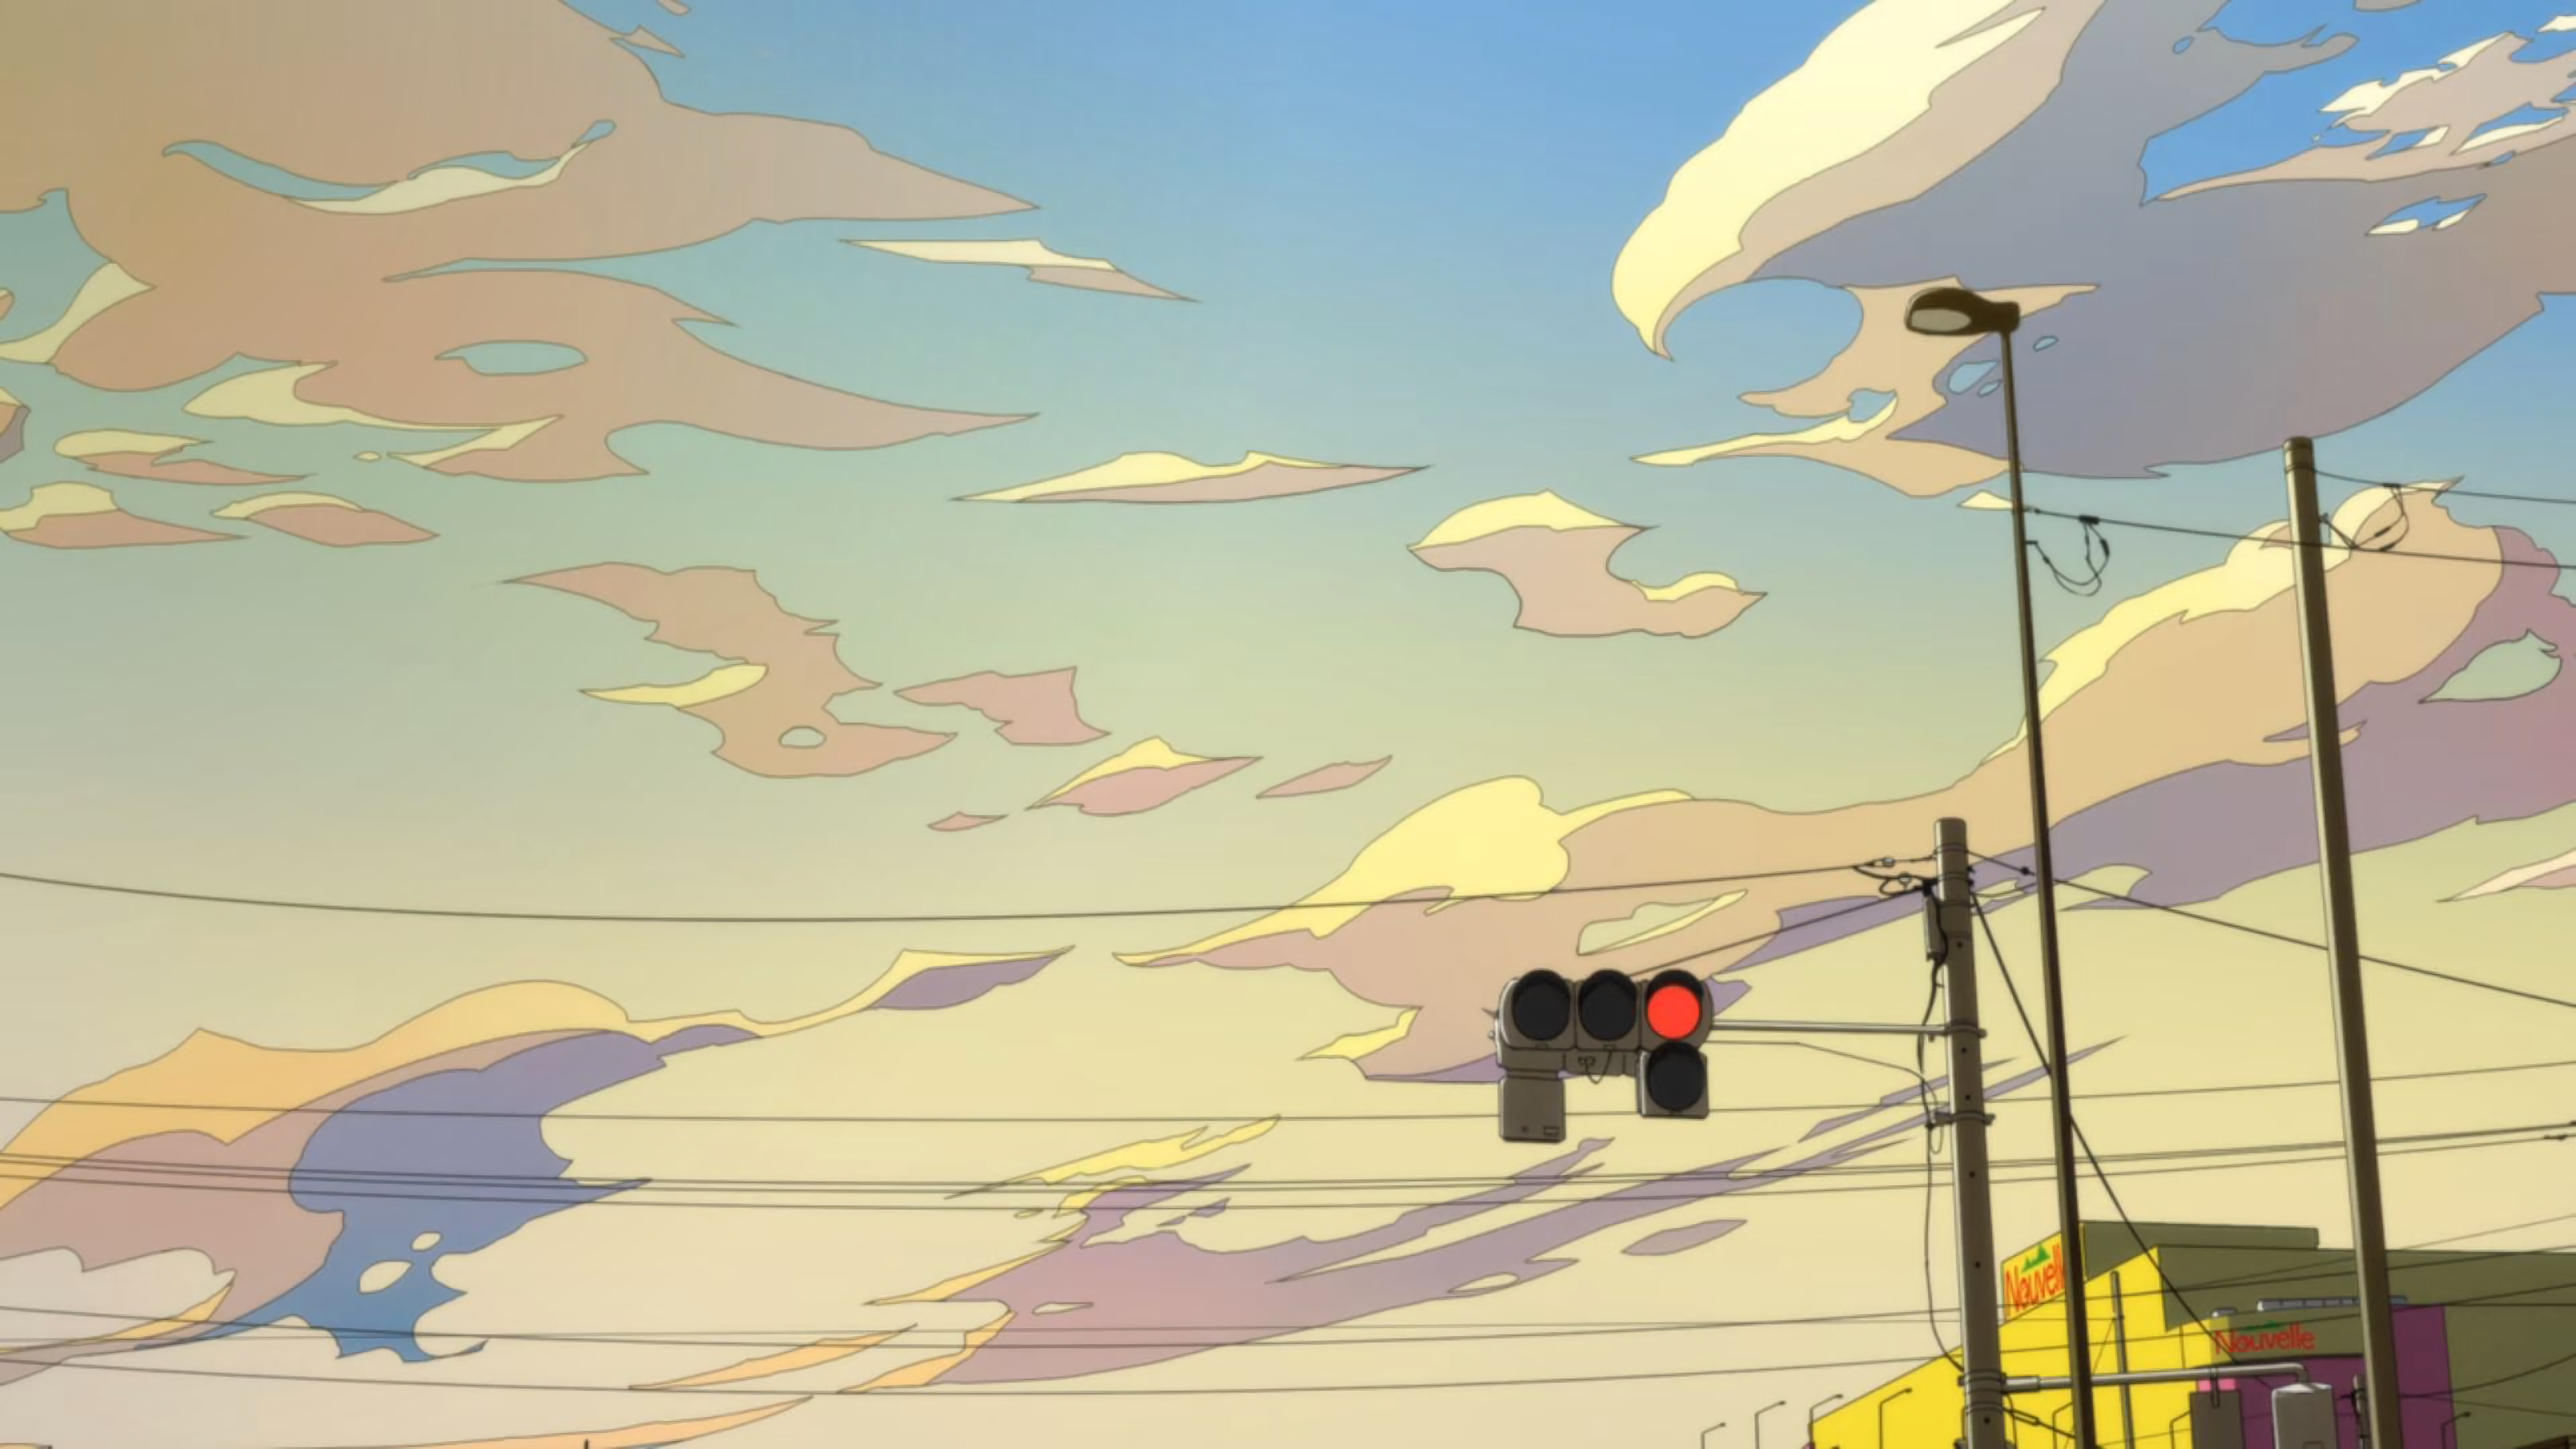 Anime 7680x4320 Words Bubble Up Like Soda Pop sky landscape wires clouds